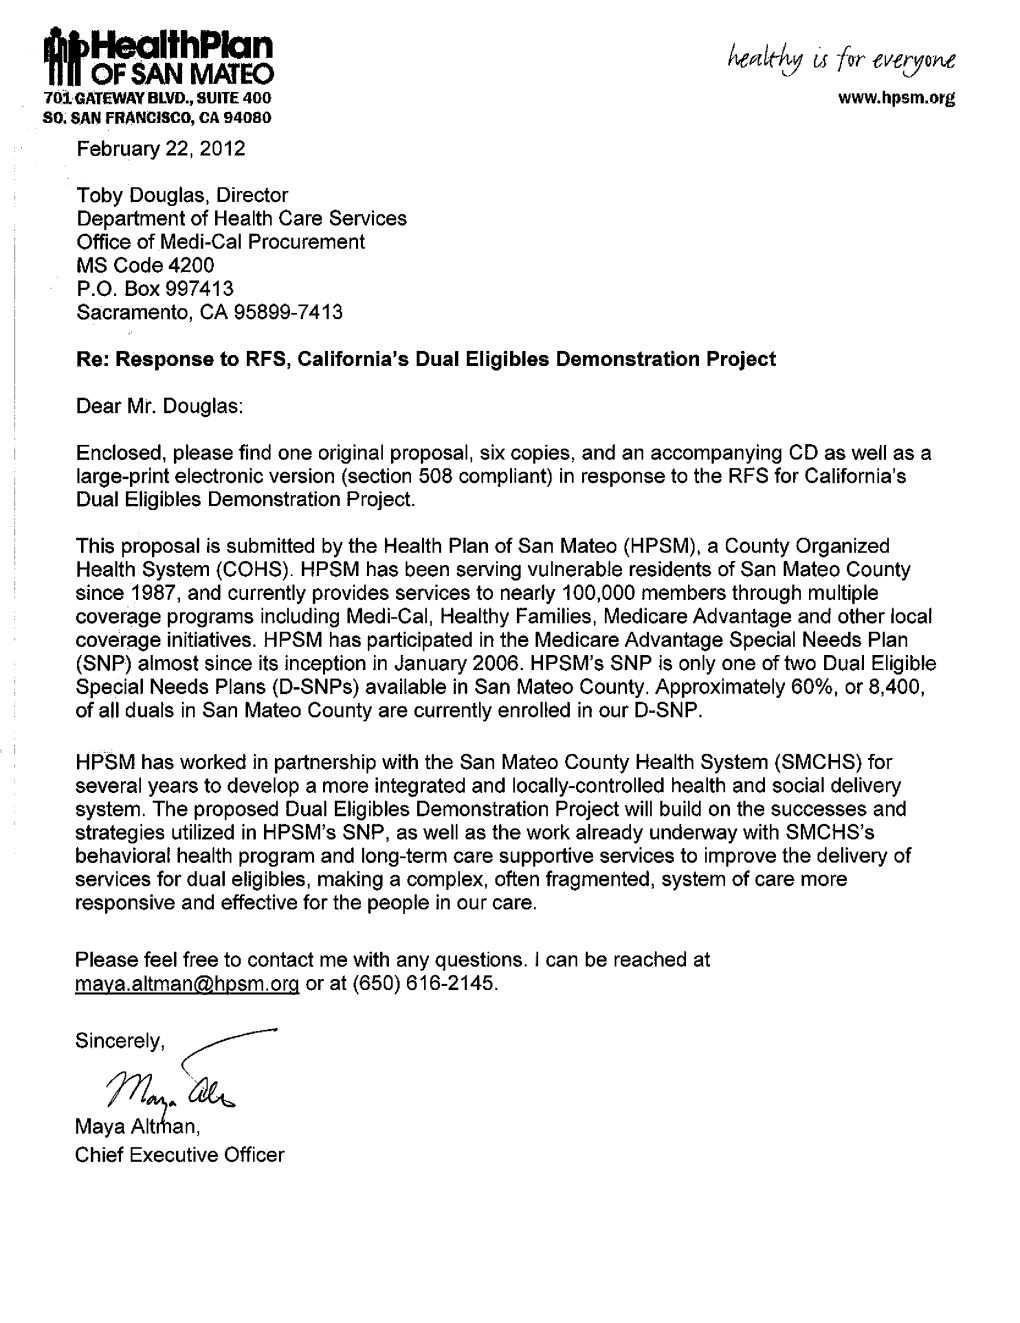 Response to RFS, California's Dual Eligibles Demonstration Project